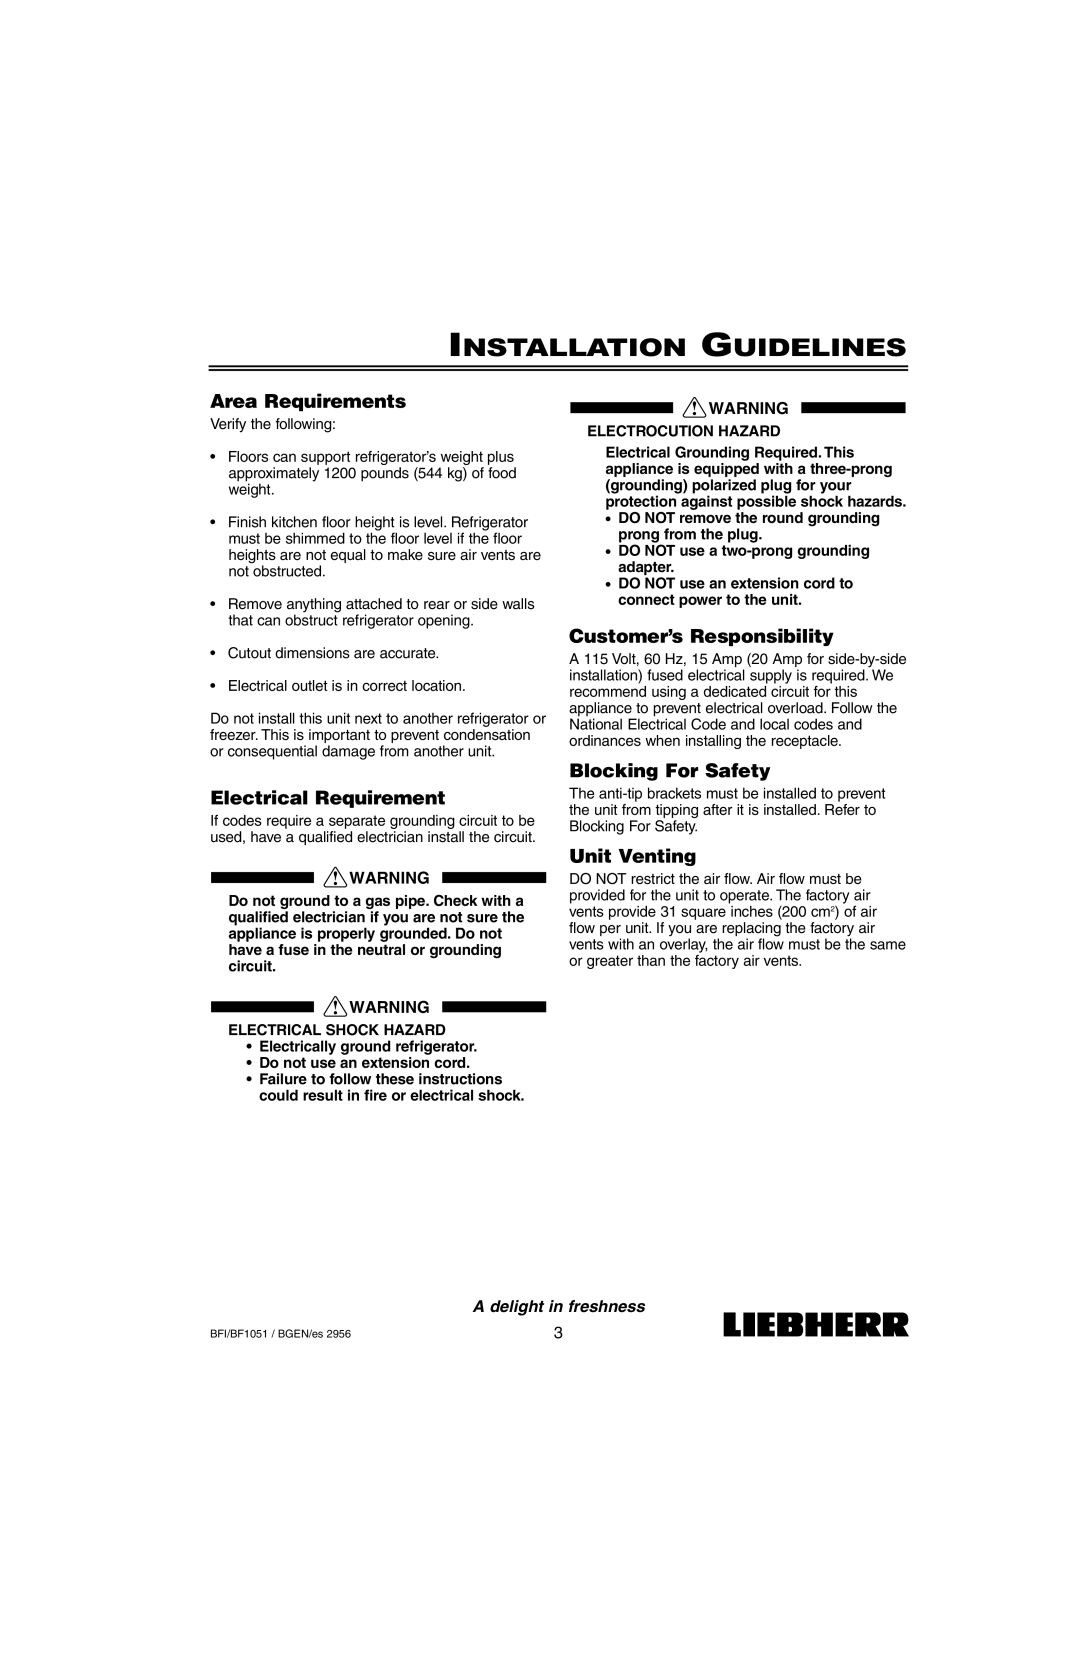 Liebherr BF1051, BFI1051 Installation Guidelines, Area Requirements, Electrical Requirement, Customer’s Responsibility 